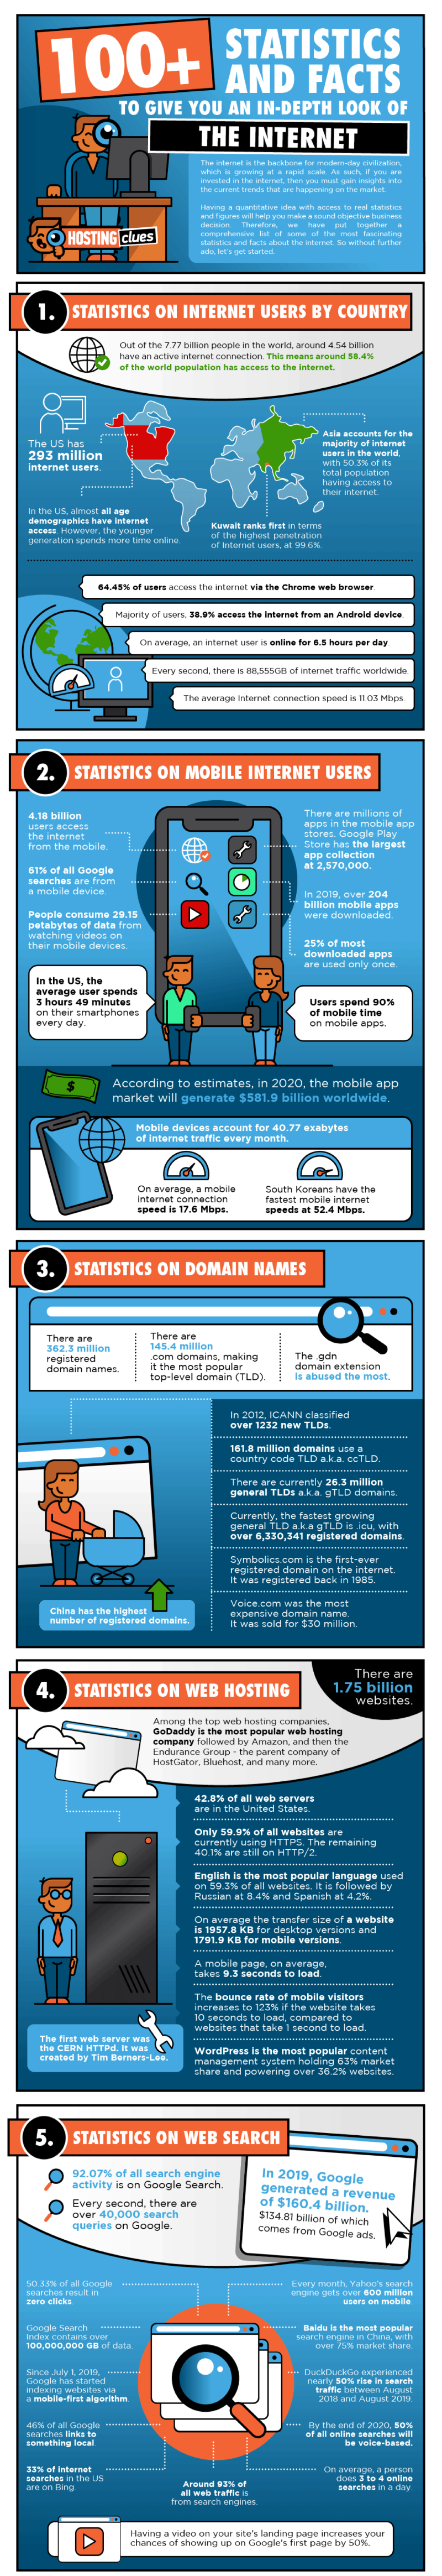 Statistics and Facts Infographic 1 100+ Statistics and Facts to Give You an In-depth Look of The Internet in 2022